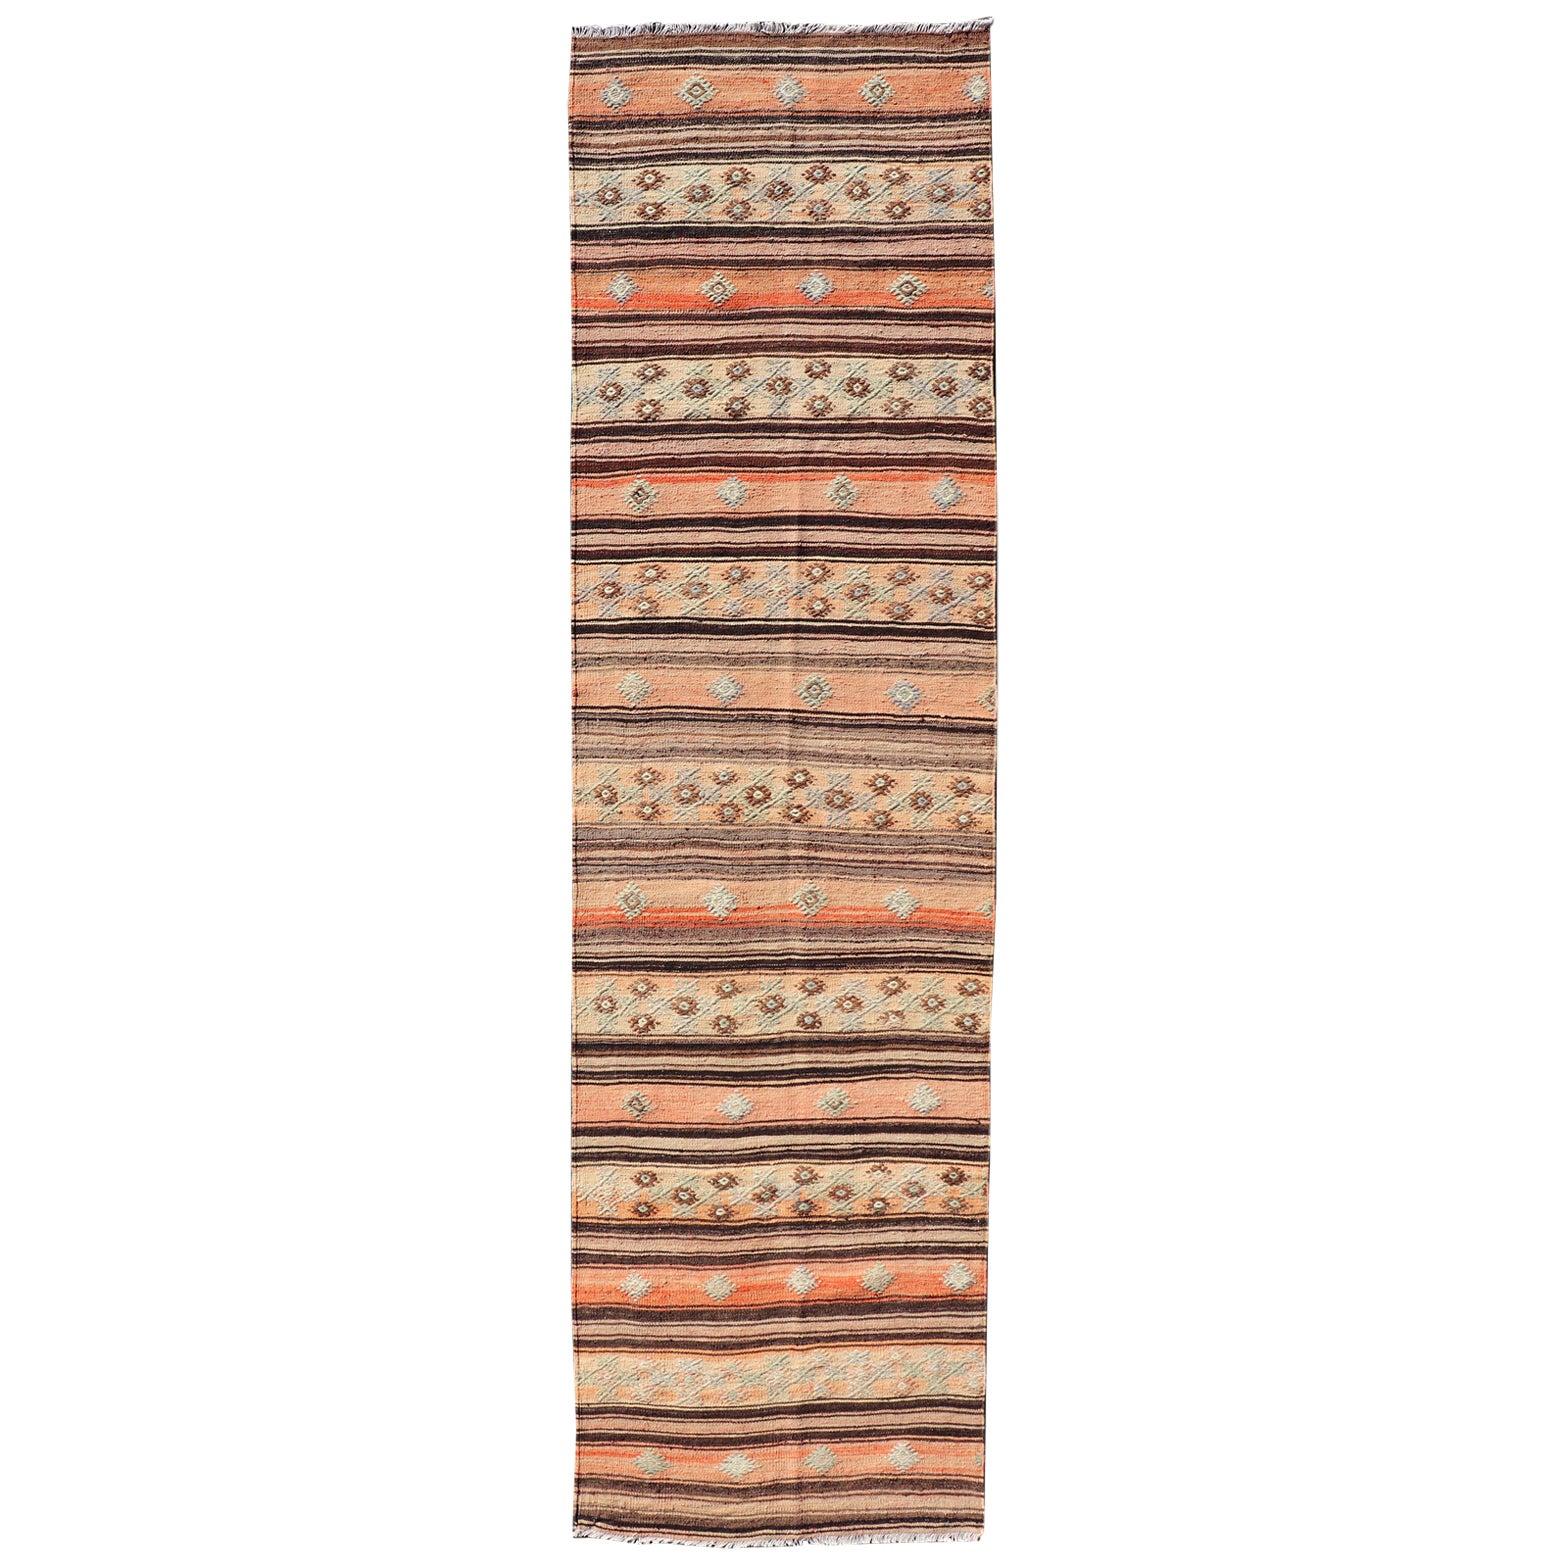 Vintage Turkish Kilim Runner with Stripes in Tan, Brown, and Orange For Sale